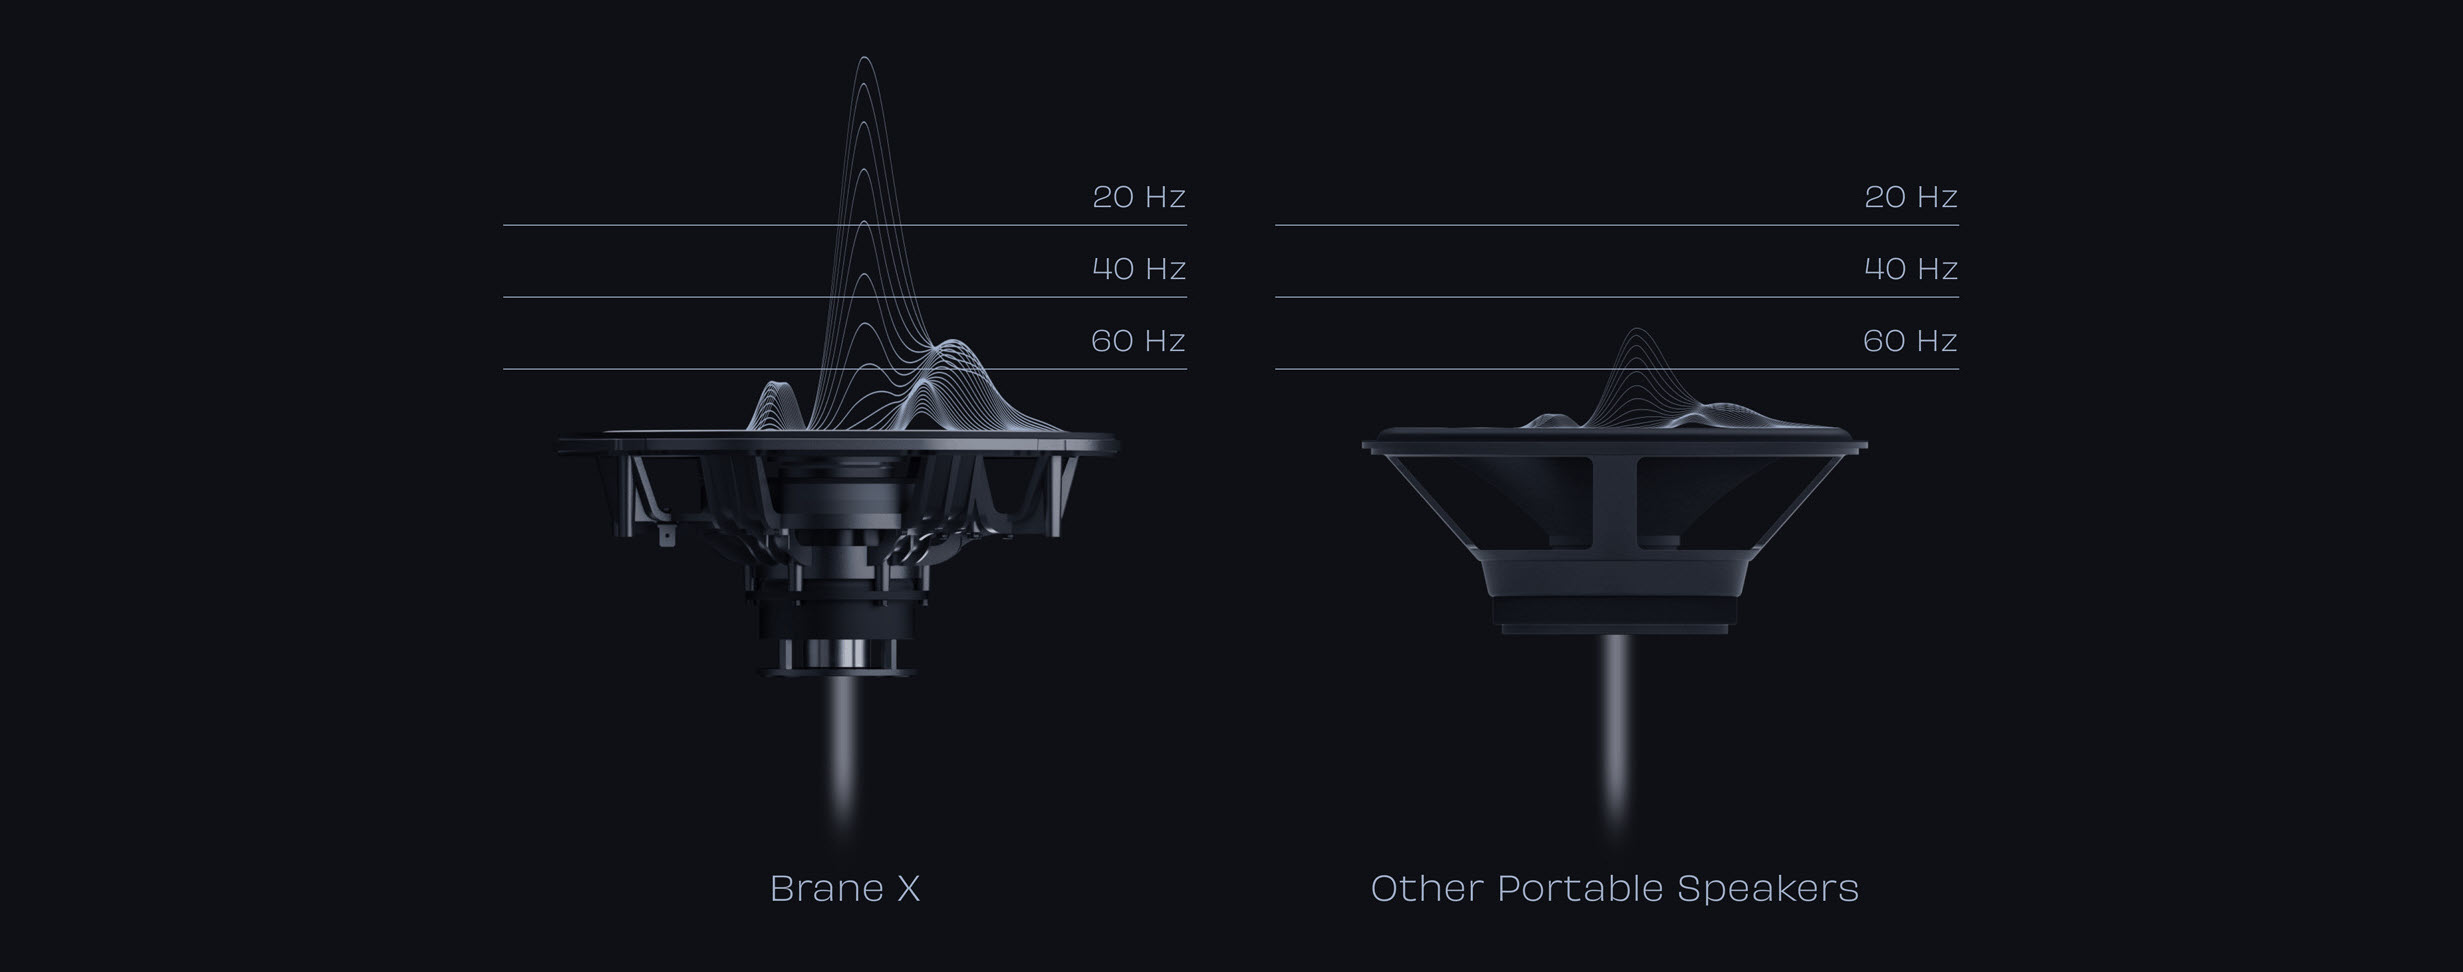 The Brane Rebel-Attract-Driver audio output compared to a normal speaker.